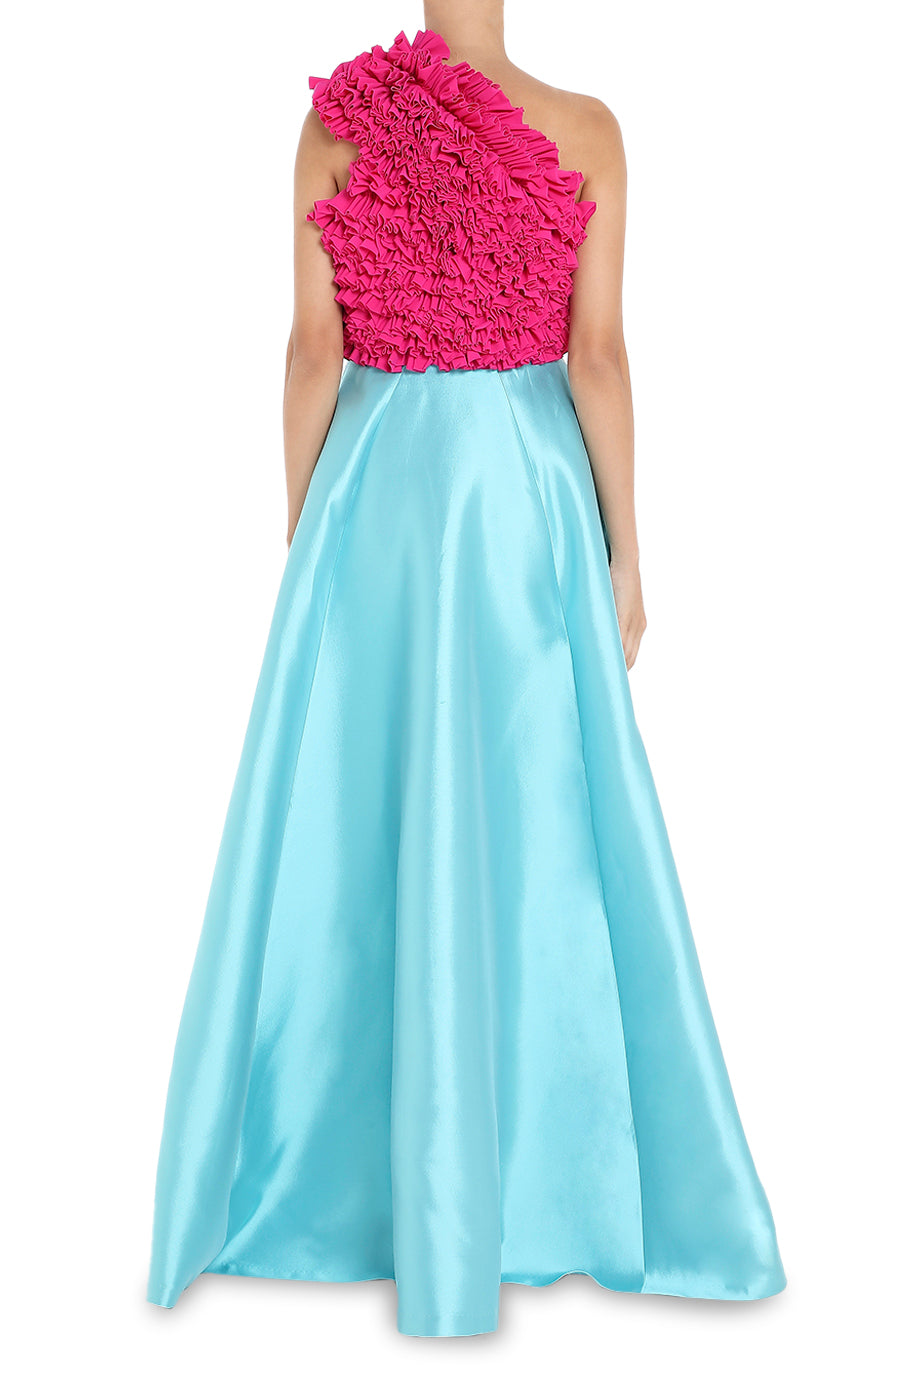 Oyce A-Line Skirt Gown